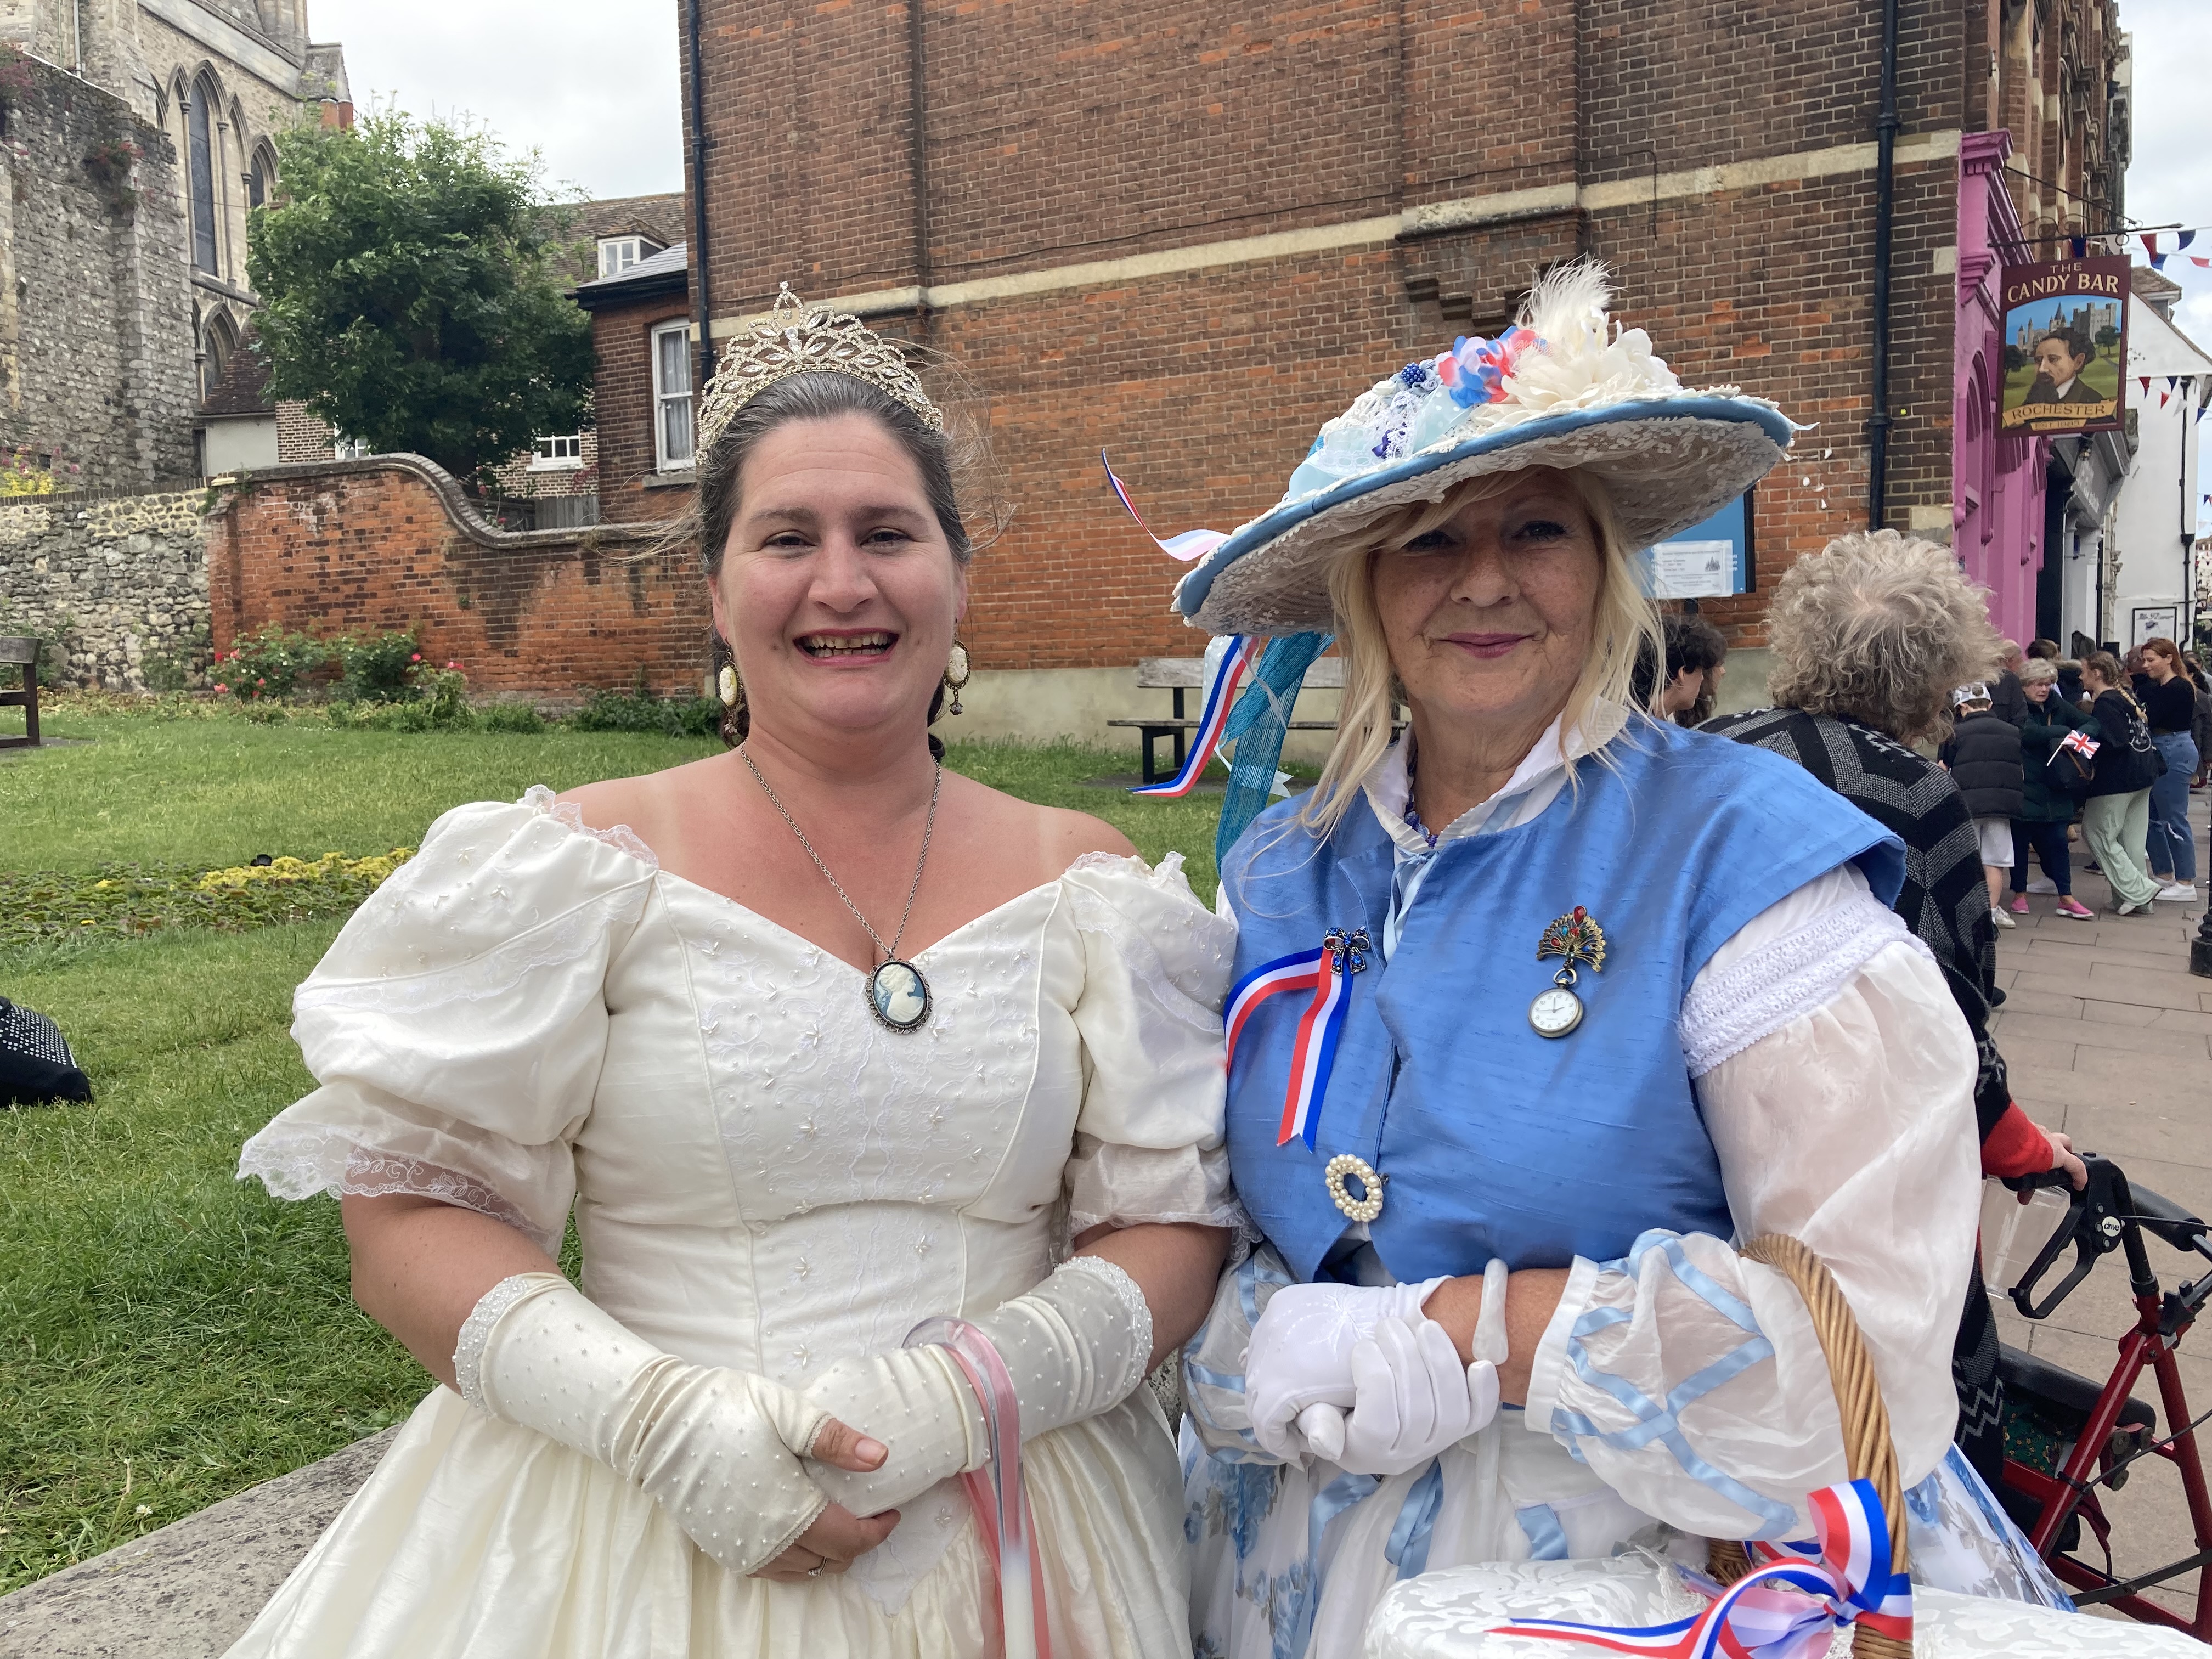 Rebecca Chorley and Sue Smyth in Dickensian period dress at the Rochester Dickens Festival marking the Platinum Jubilee on June 4, 2022